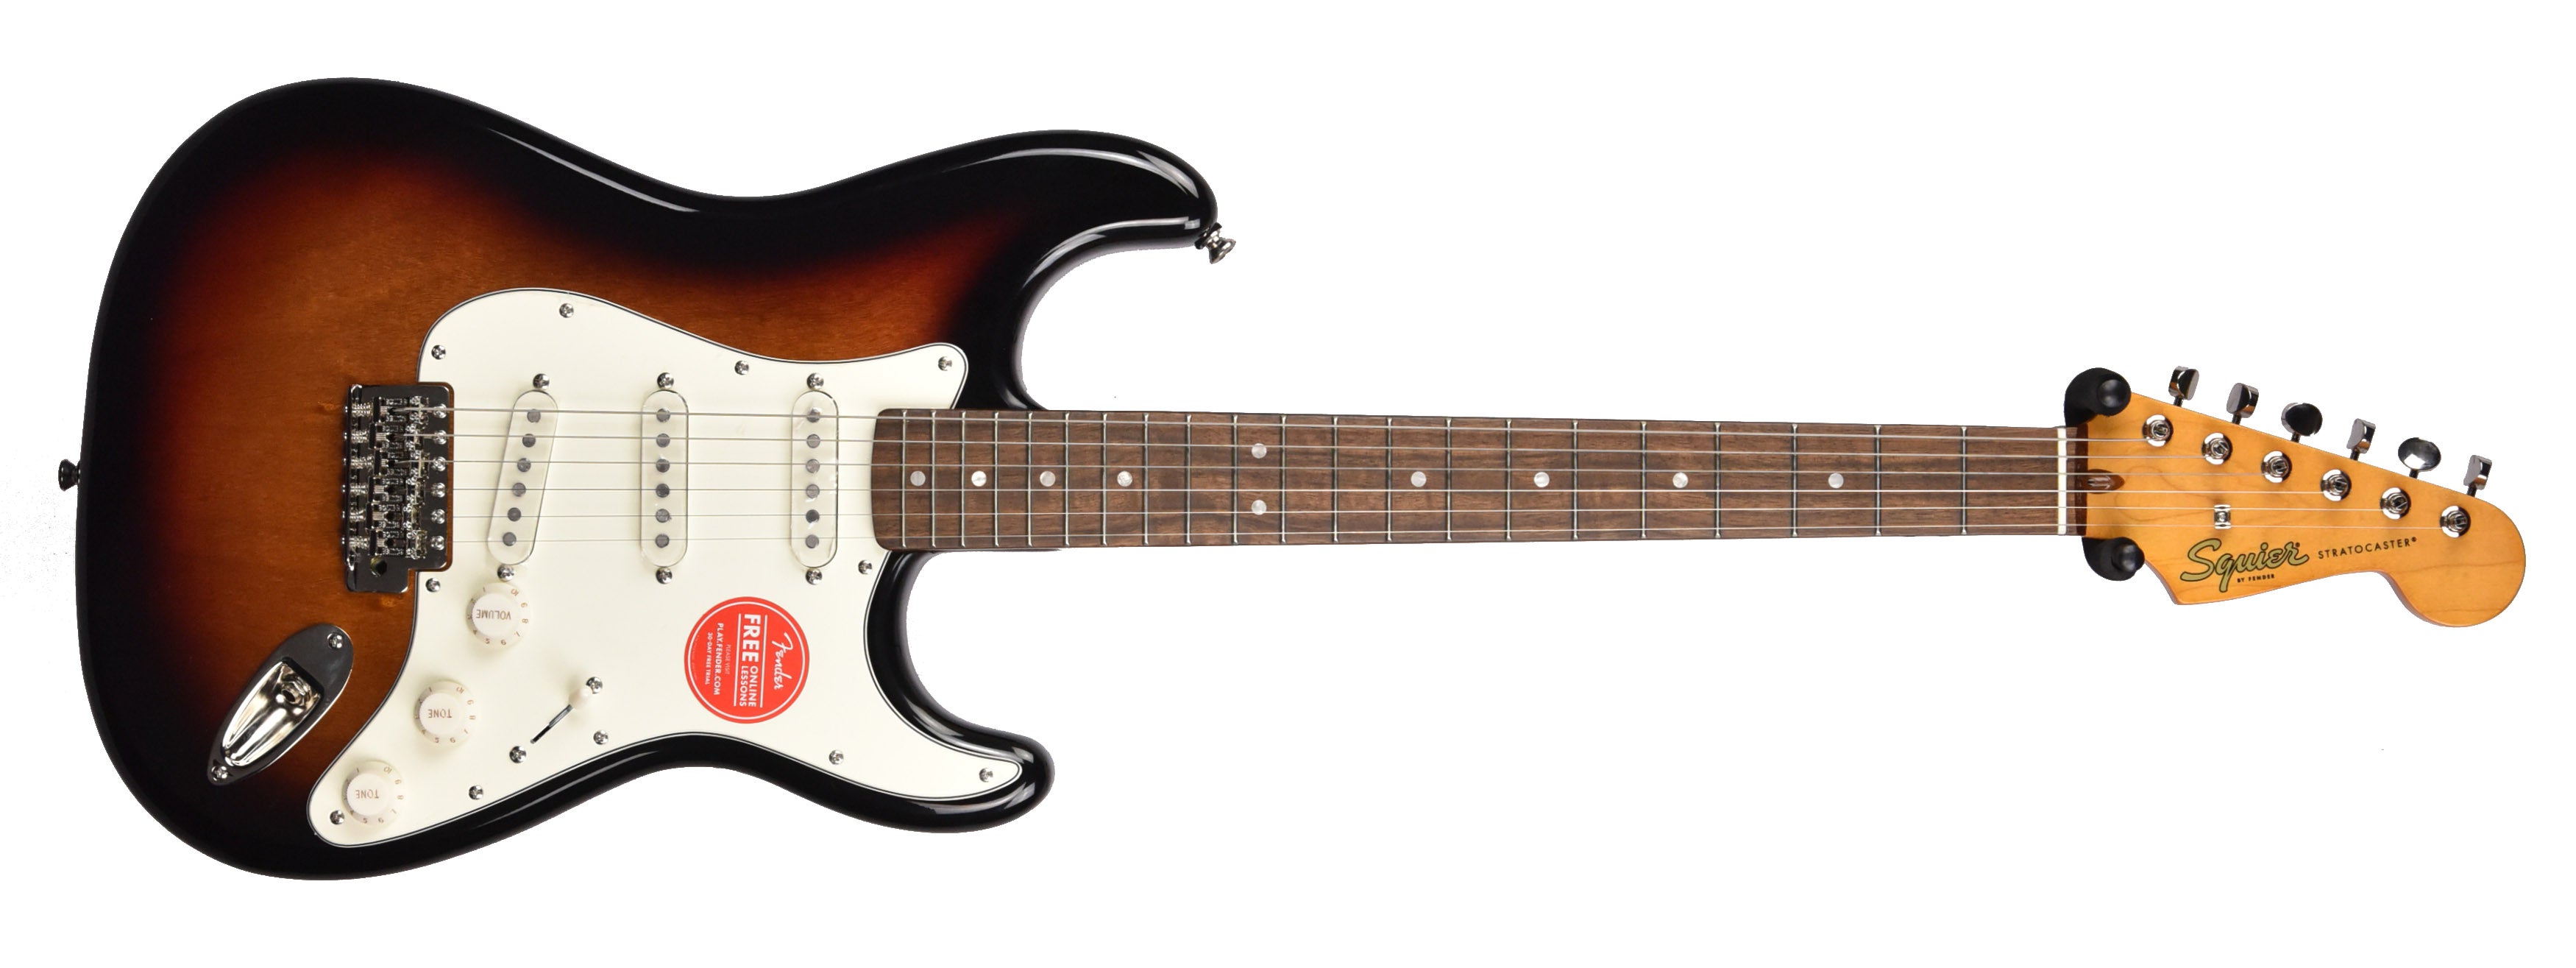 Fender - 週末値下squier classic vibe 60s stratocasterの通販 by curly's  shop｜フェンダーならラクマ - エレキギター